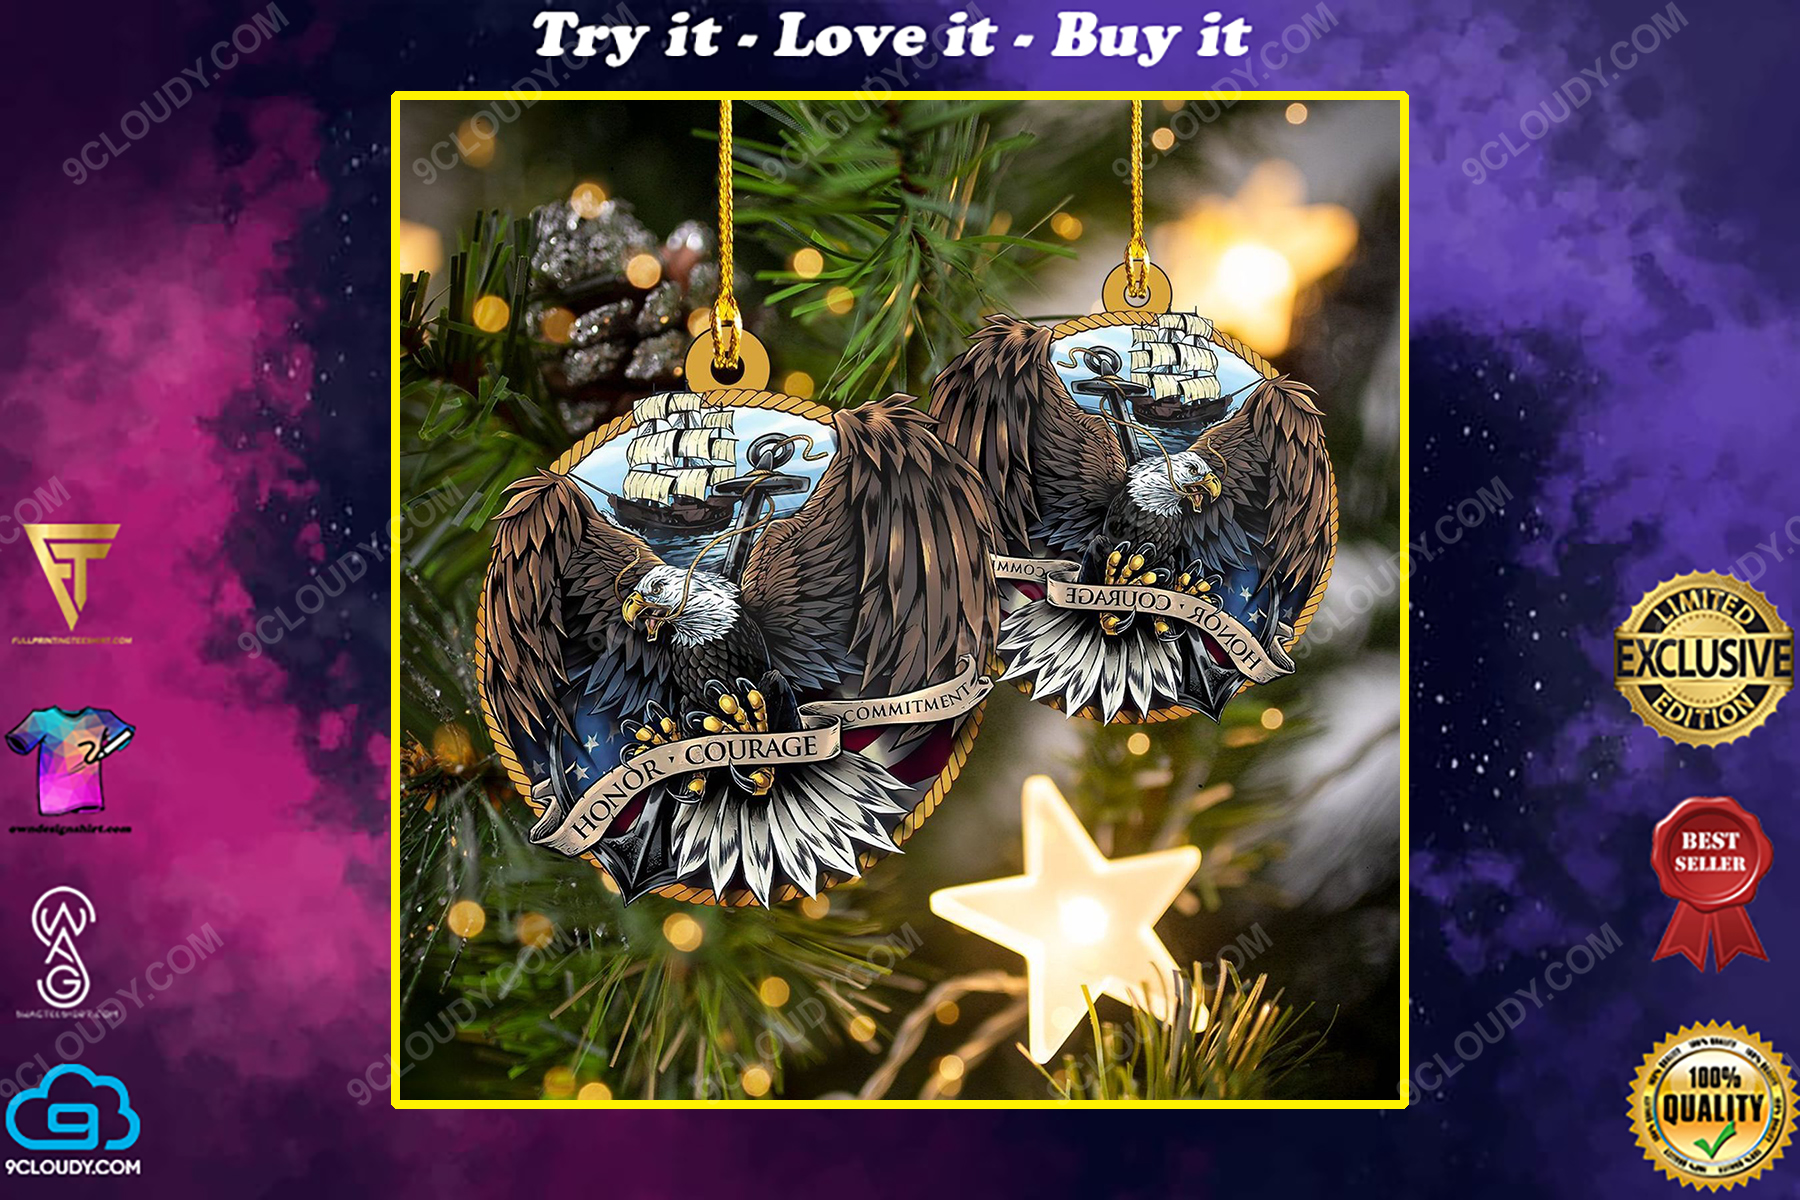 Navy eagle honor courage commitment christmas gift ornament